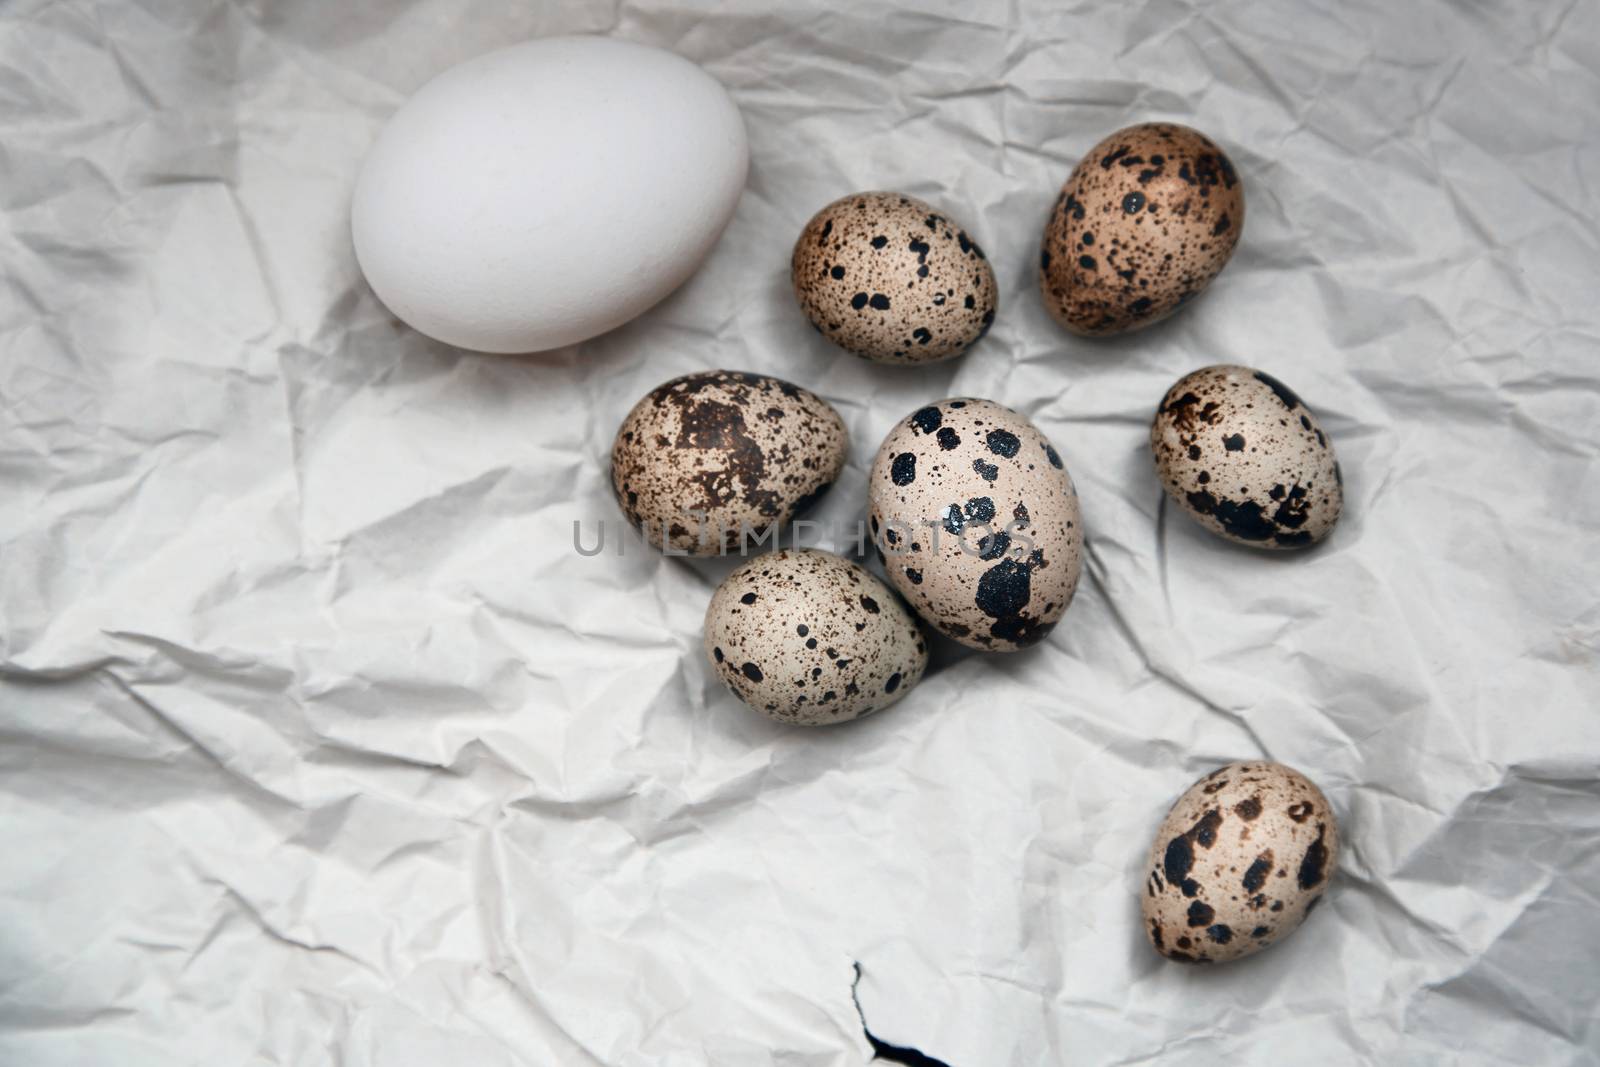 Chicken and quail eggs on a wrapping paper